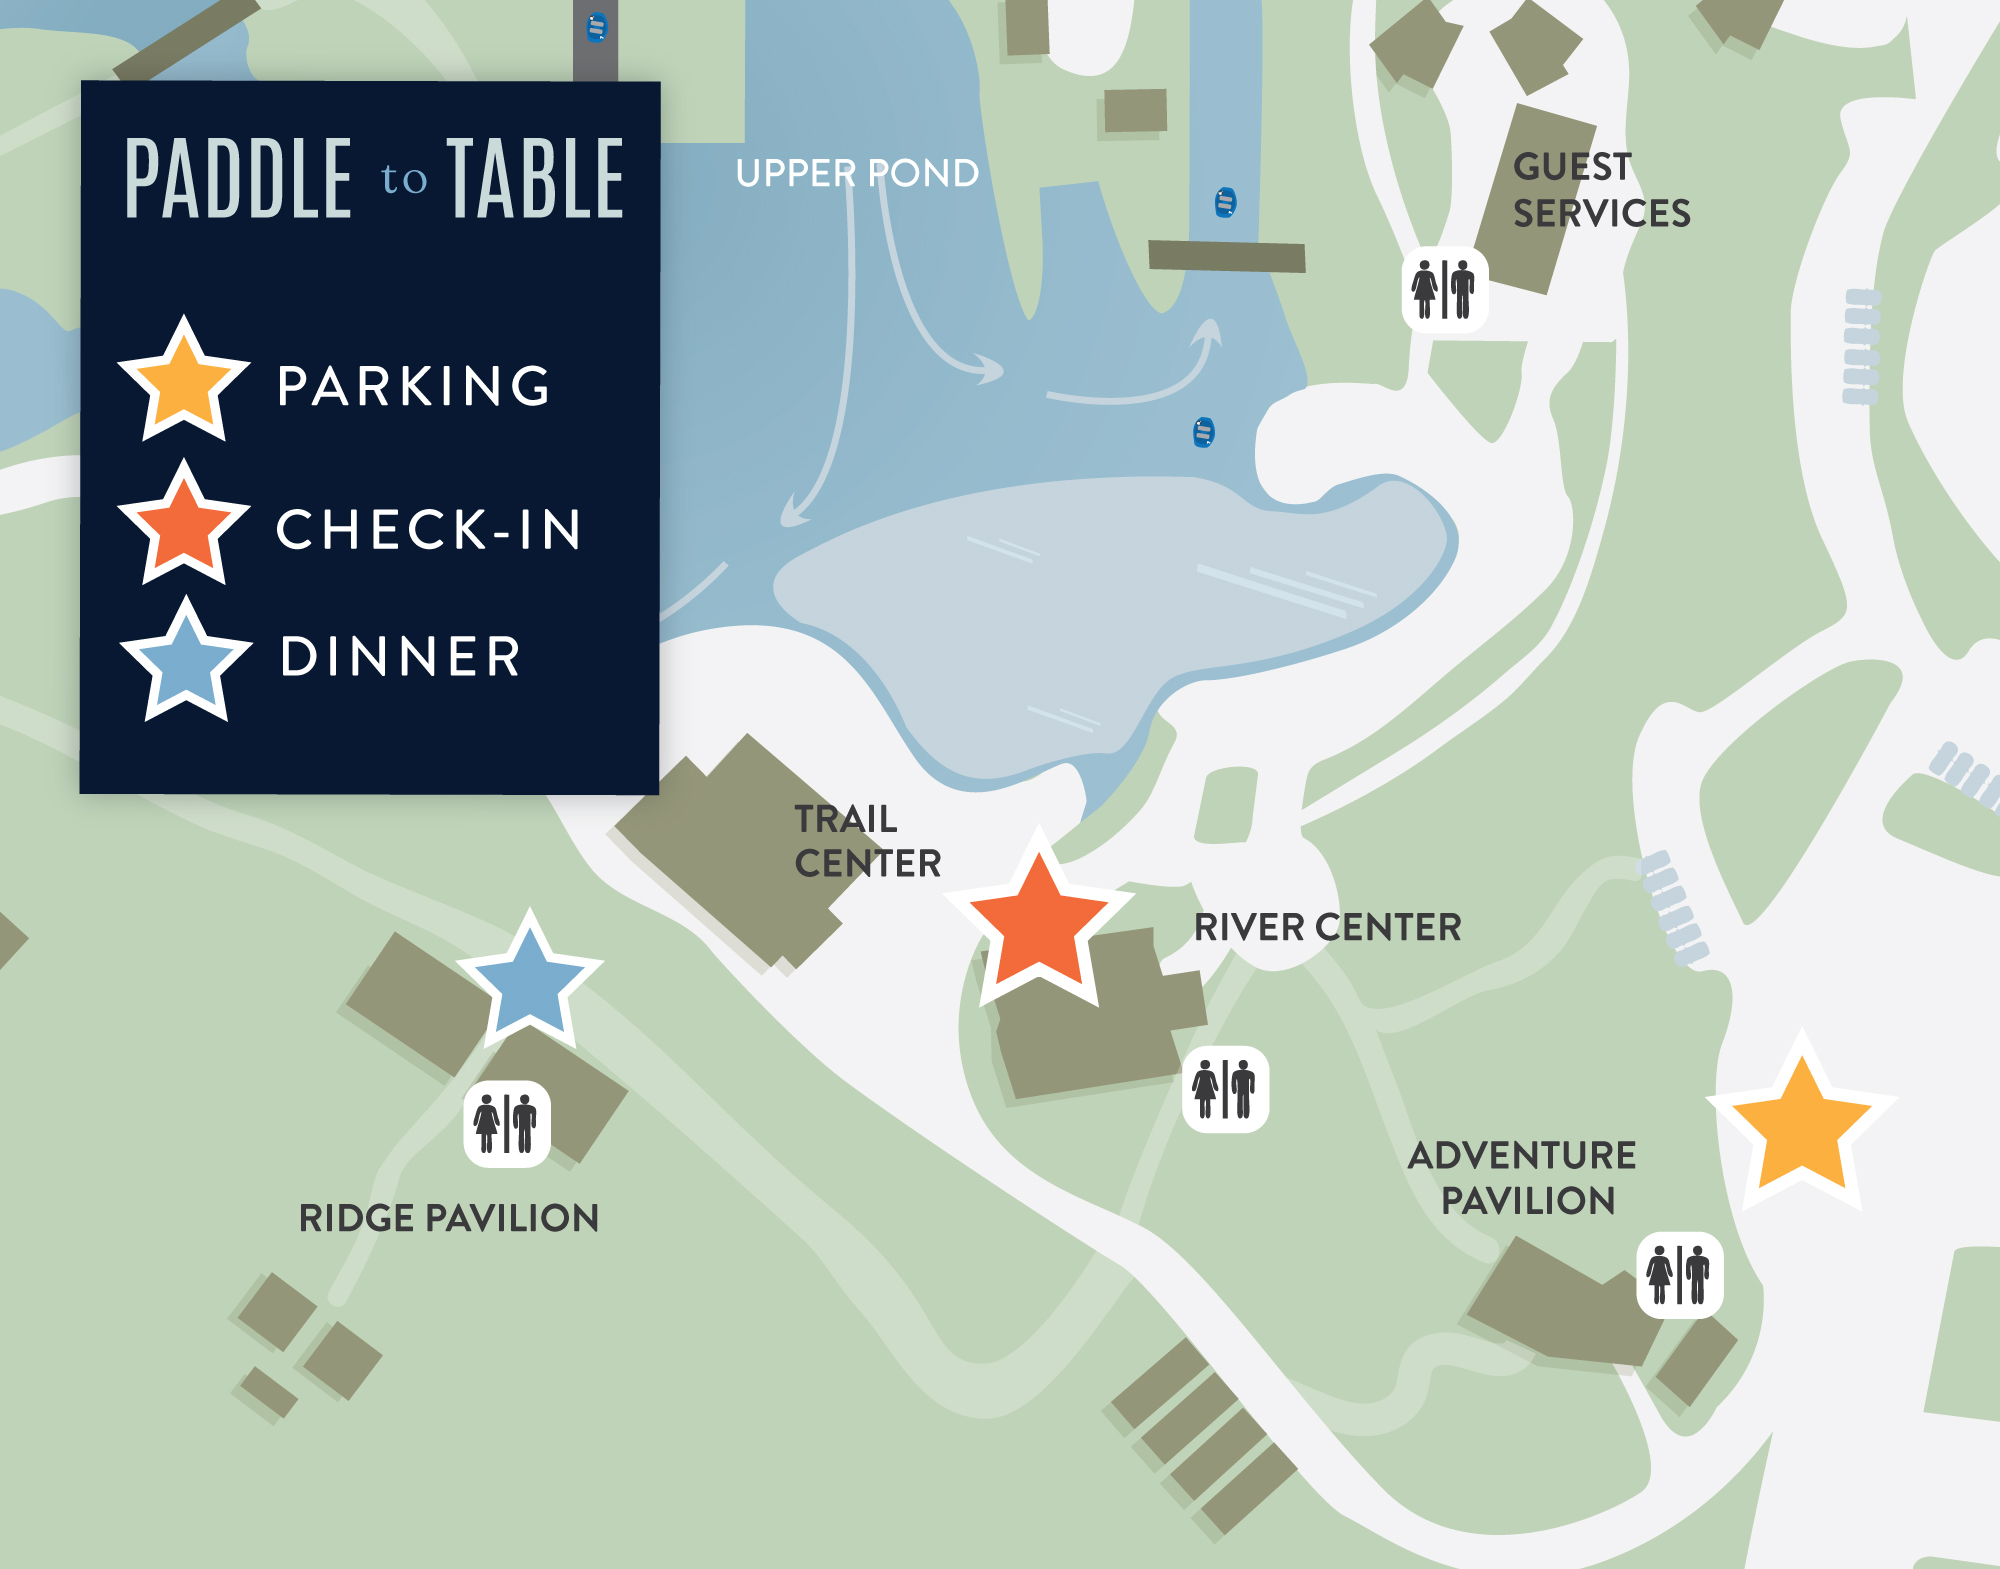 Paddle to Table Map